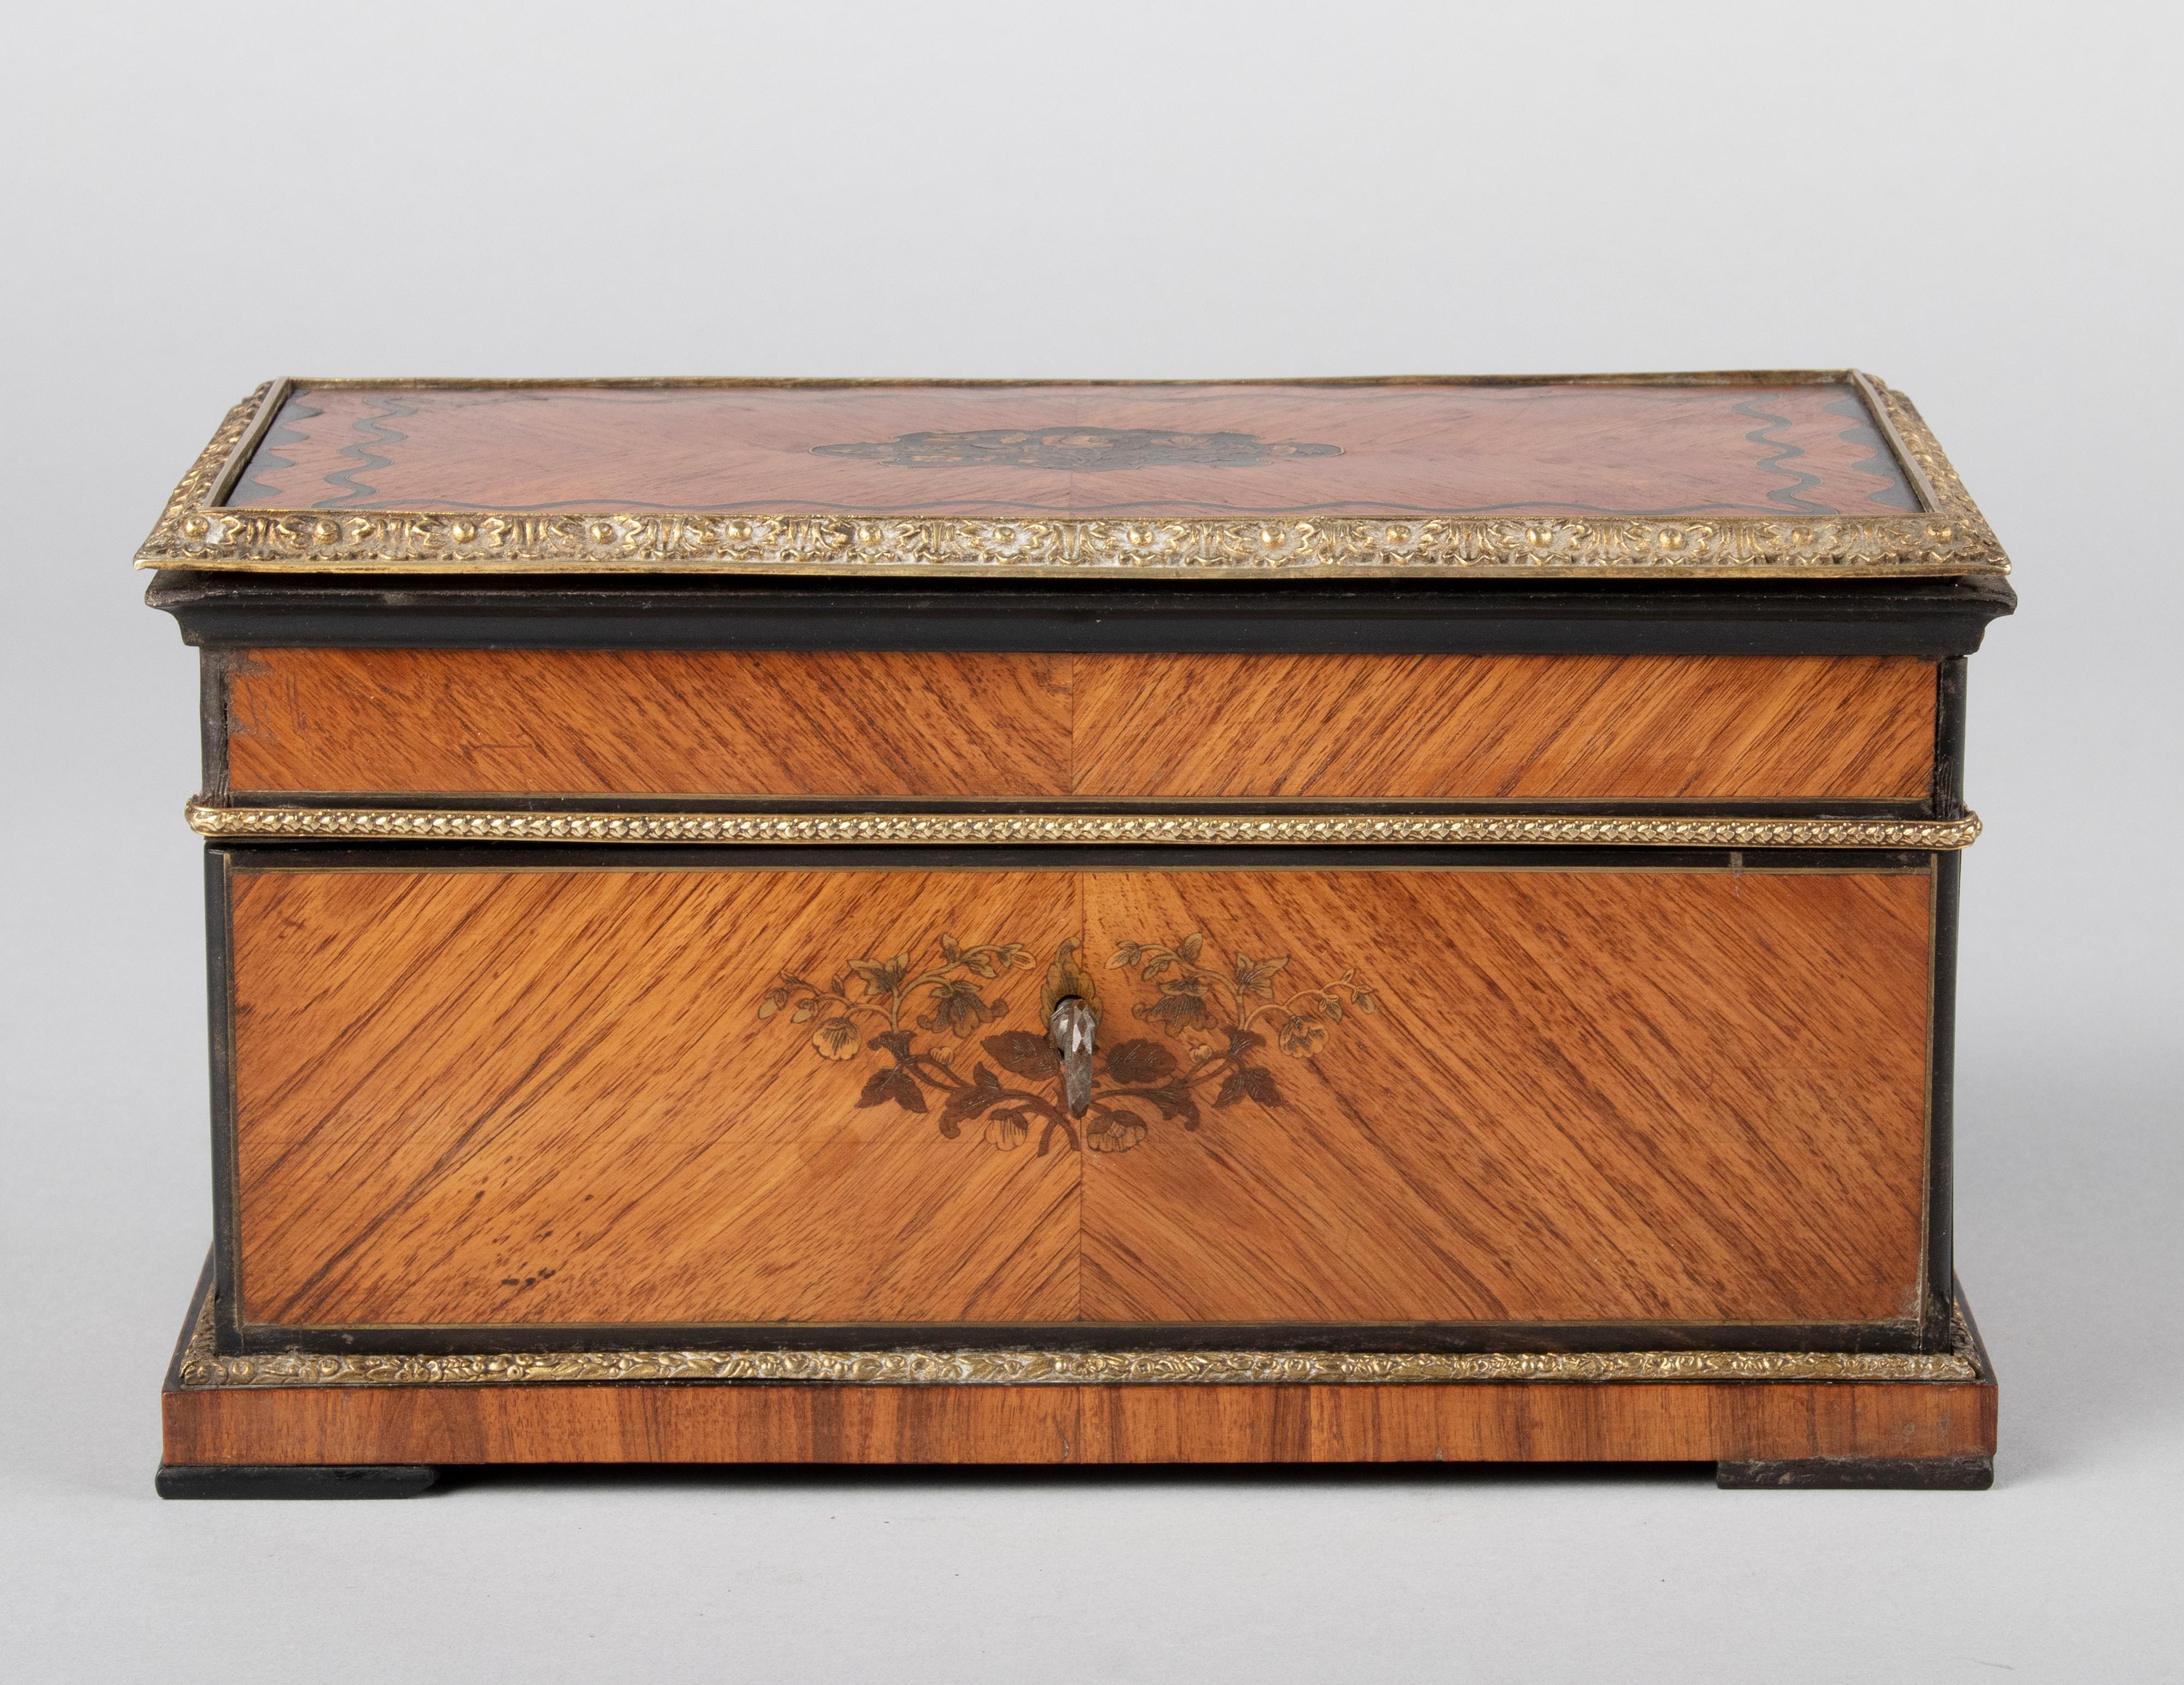 A refined antique French tea caddy from the end of Napoleon III. The box is beautifully inlaid with different types of wood and brass, outside around a bronze rim. Inside two tea boxes made of Birdseye maple wood, the lids have inlay of colored